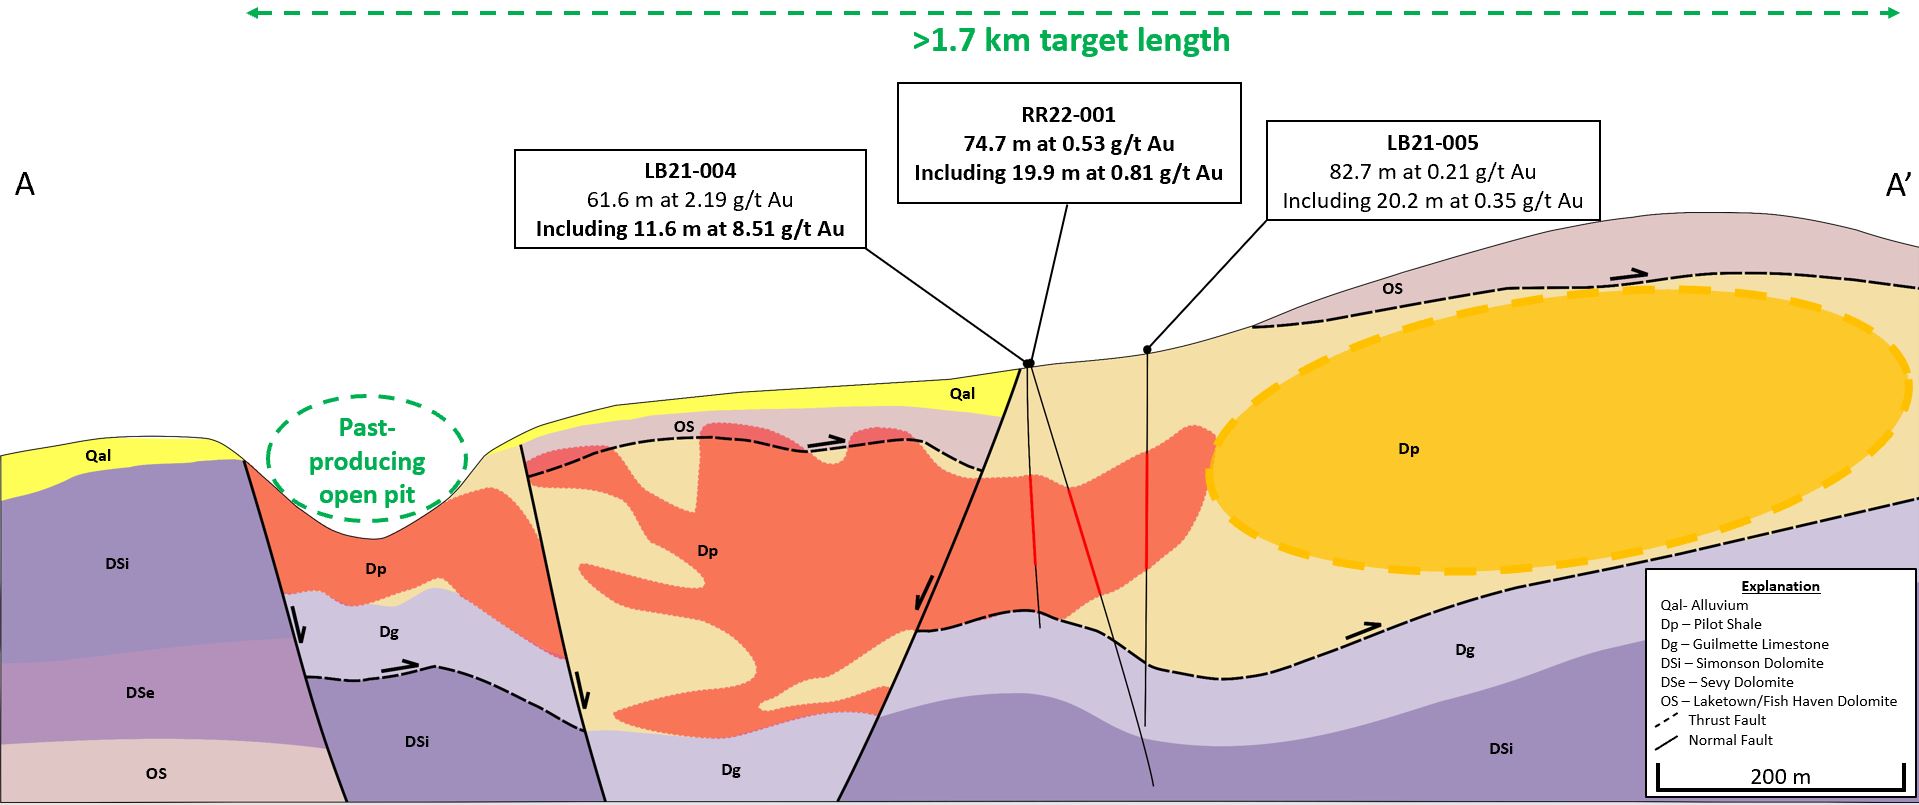 4cb9aadd 2e4f 4ea3 8bb2 c4c4ef12f24c NevGold Intercepts 0.53 g/t Oxide Au over 74.7 Meters And Expands The Mineralized Footprint Over 100 Meters At Resurrection Ridge